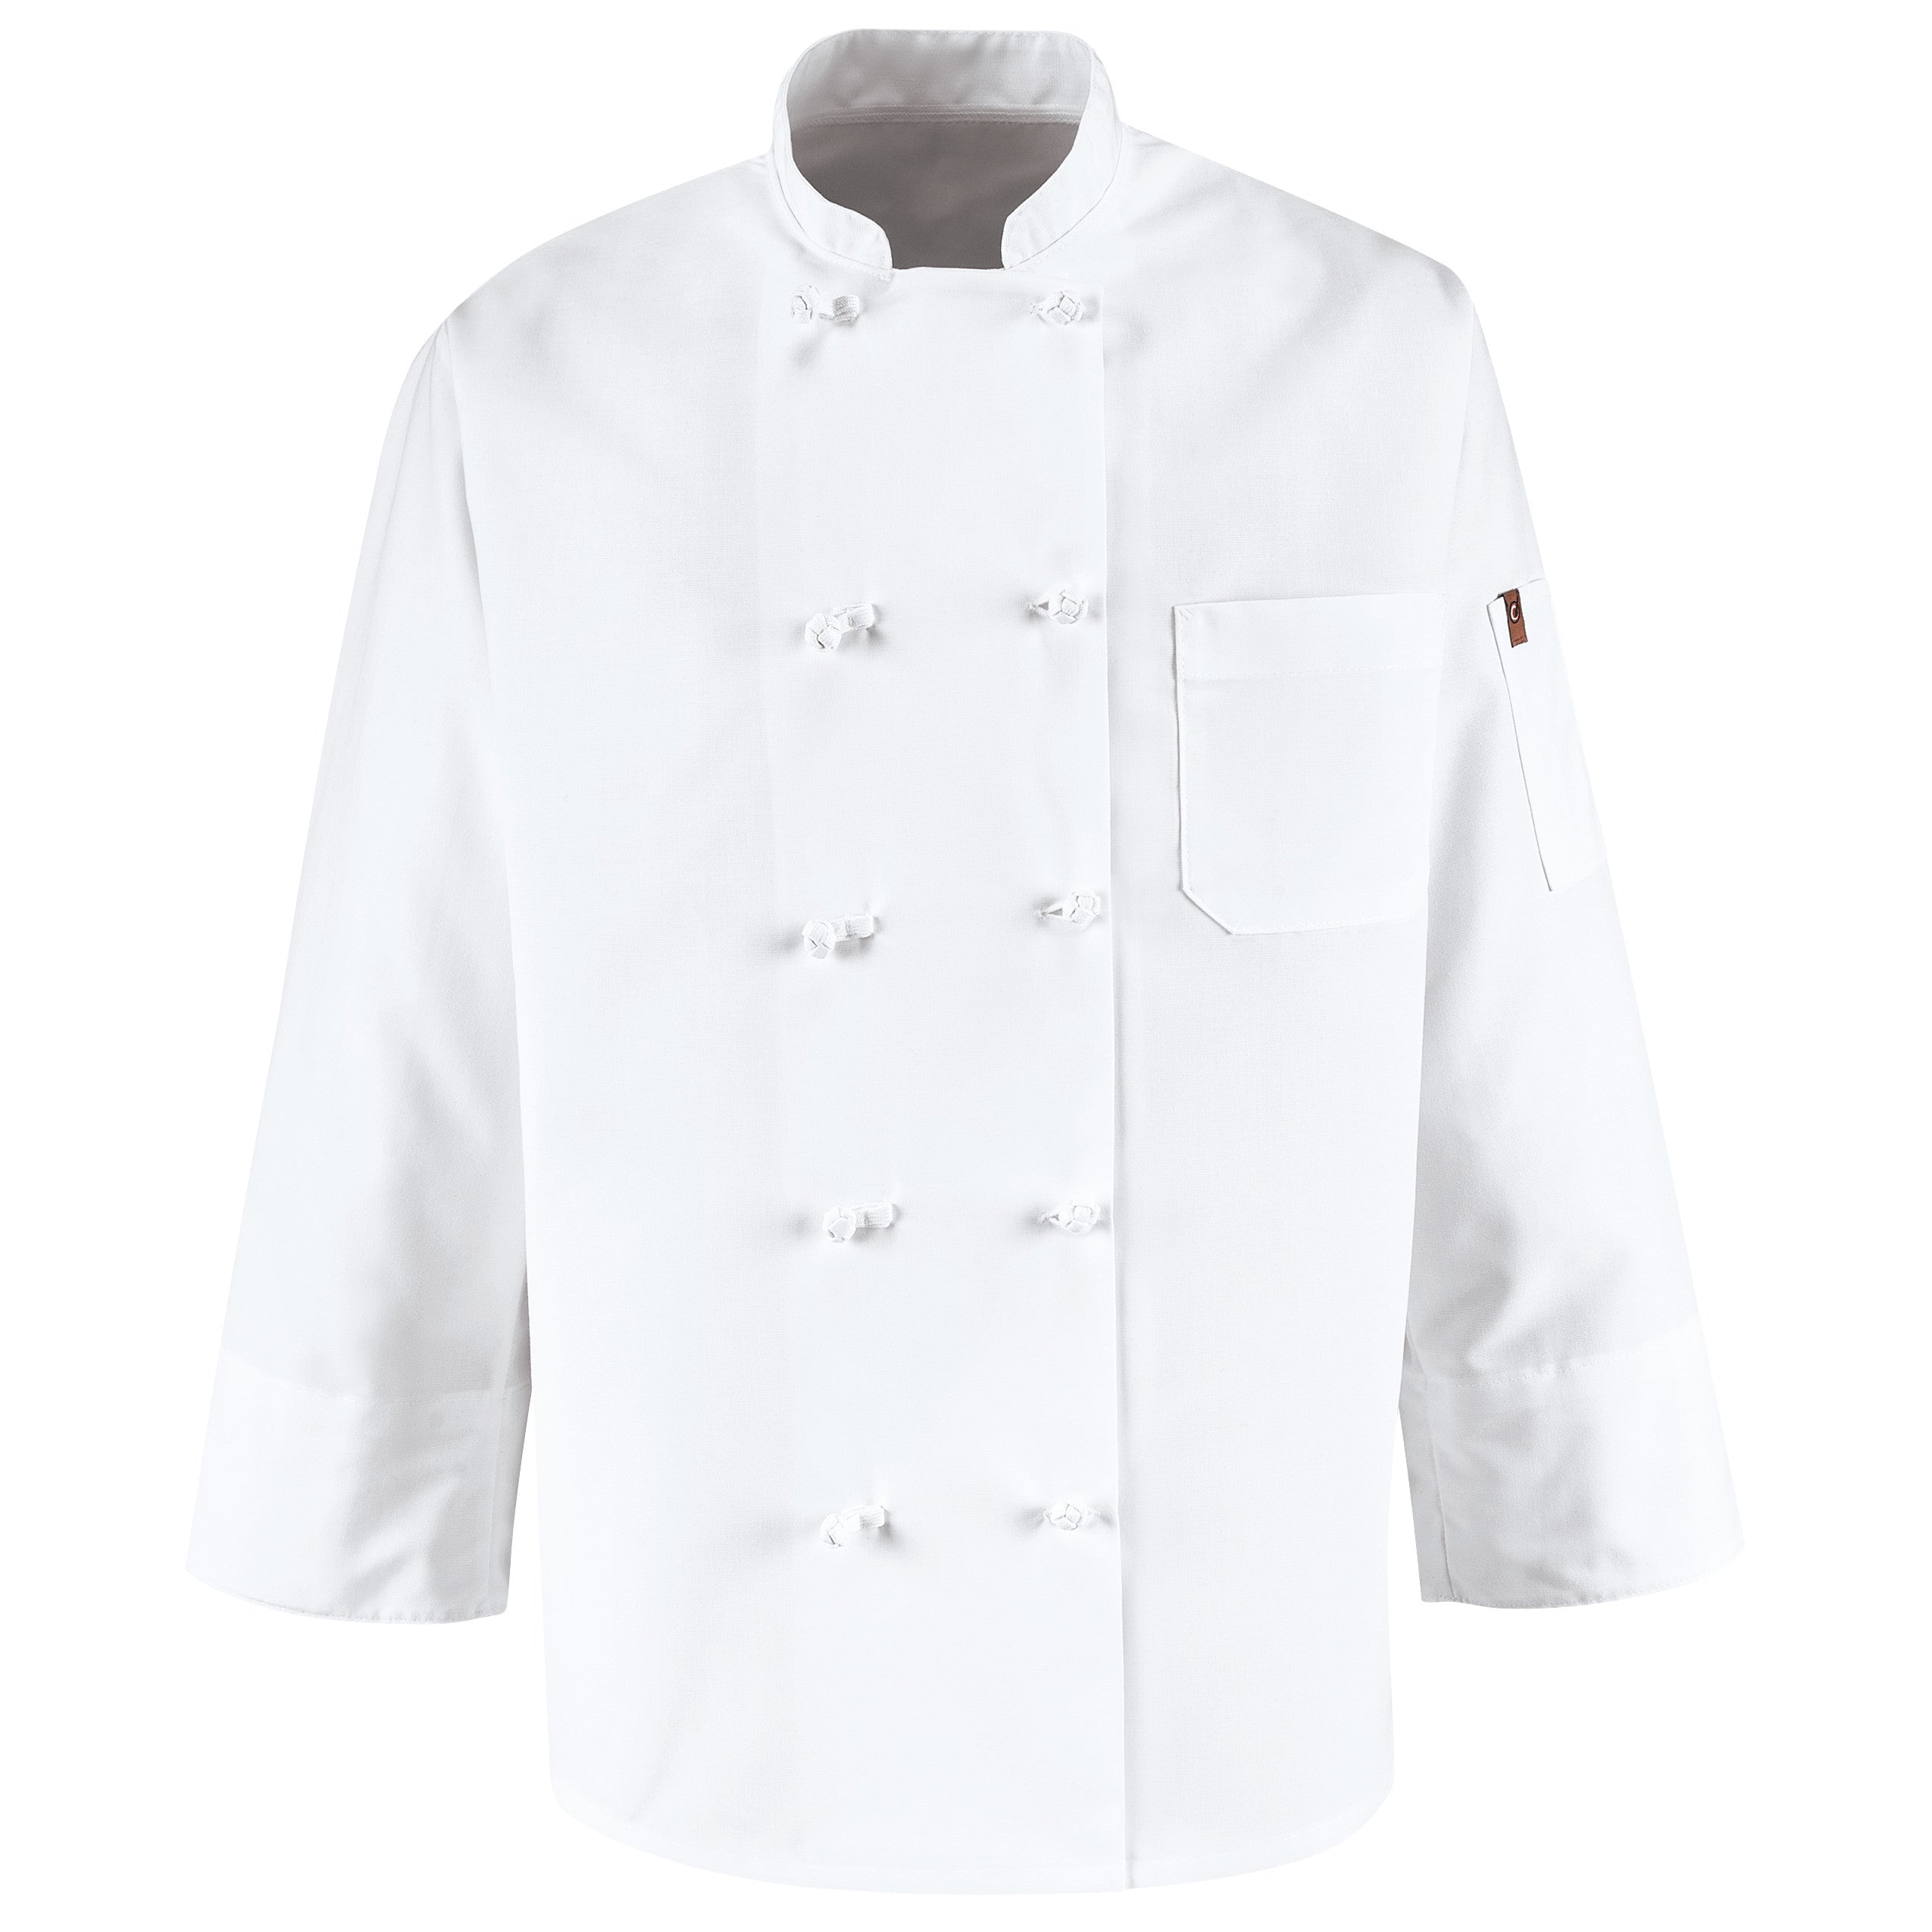 Eight Knot Button Chef Coat with Thermometer Pocket 0421 - White-eSafety Supplies, Inc